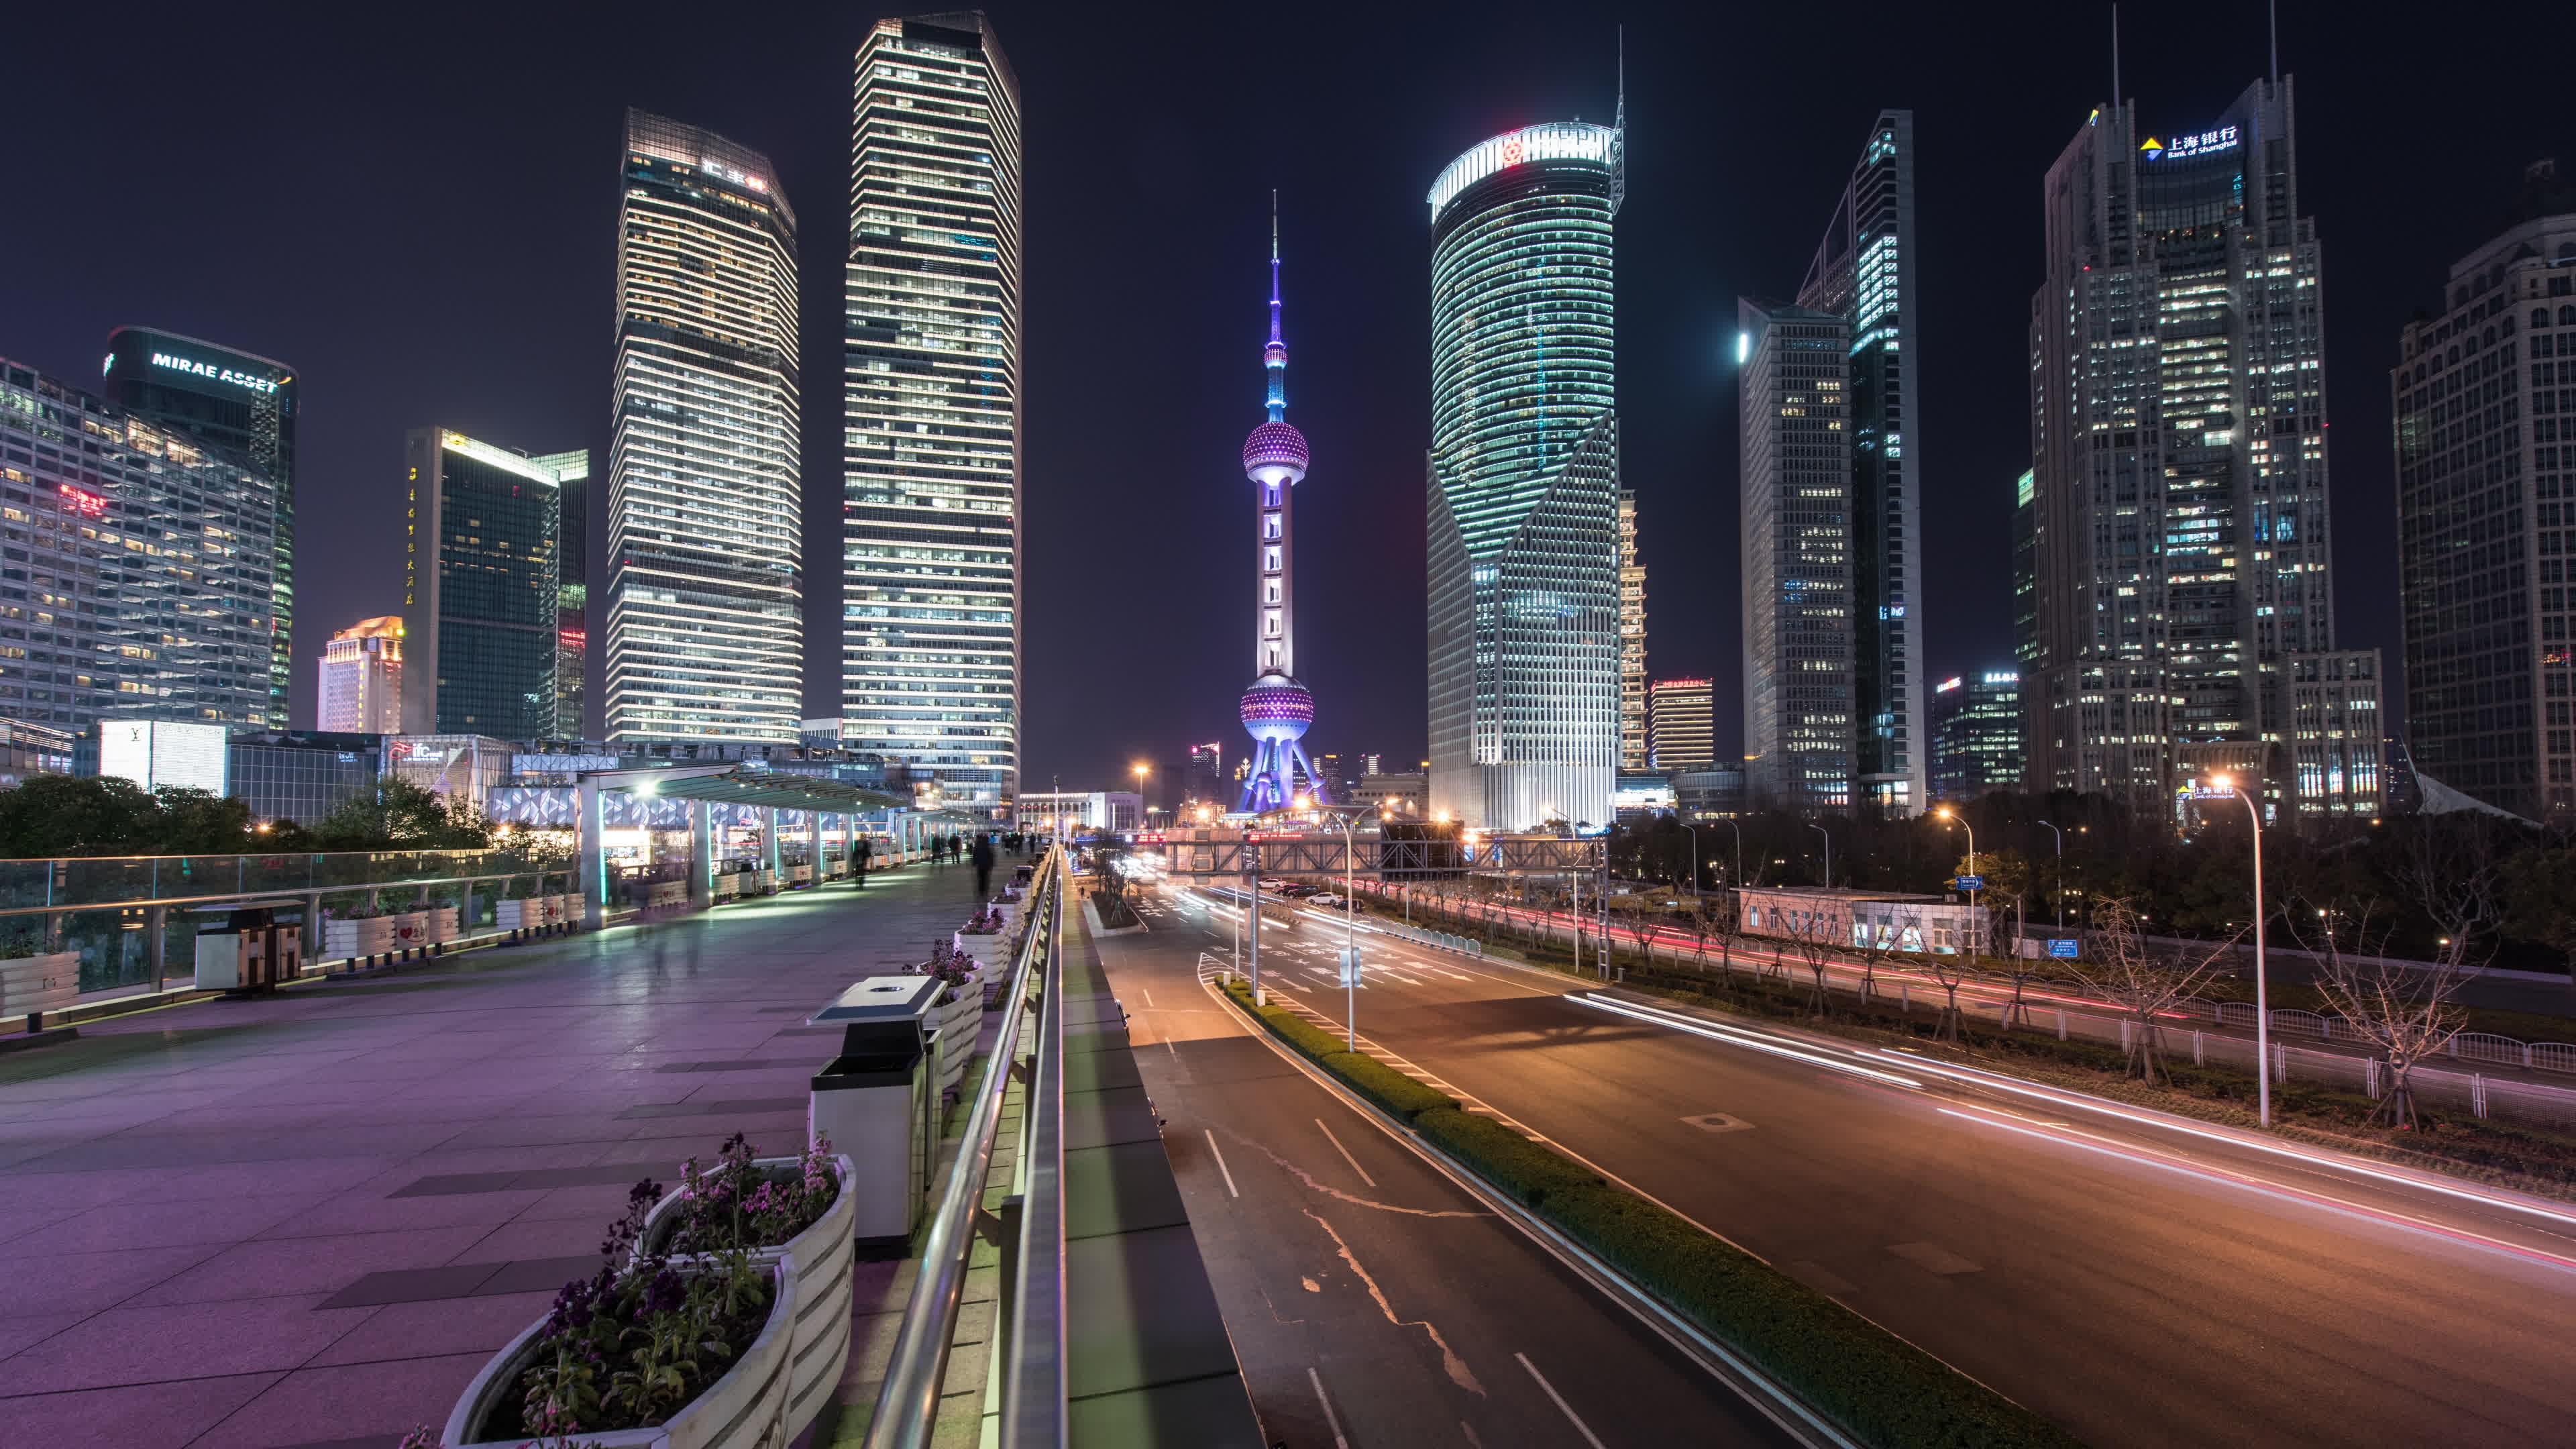 Cityscape: The central road of Shanghai, China, The Oriental Pearl Tower. 3840x2160 4K Wallpaper.